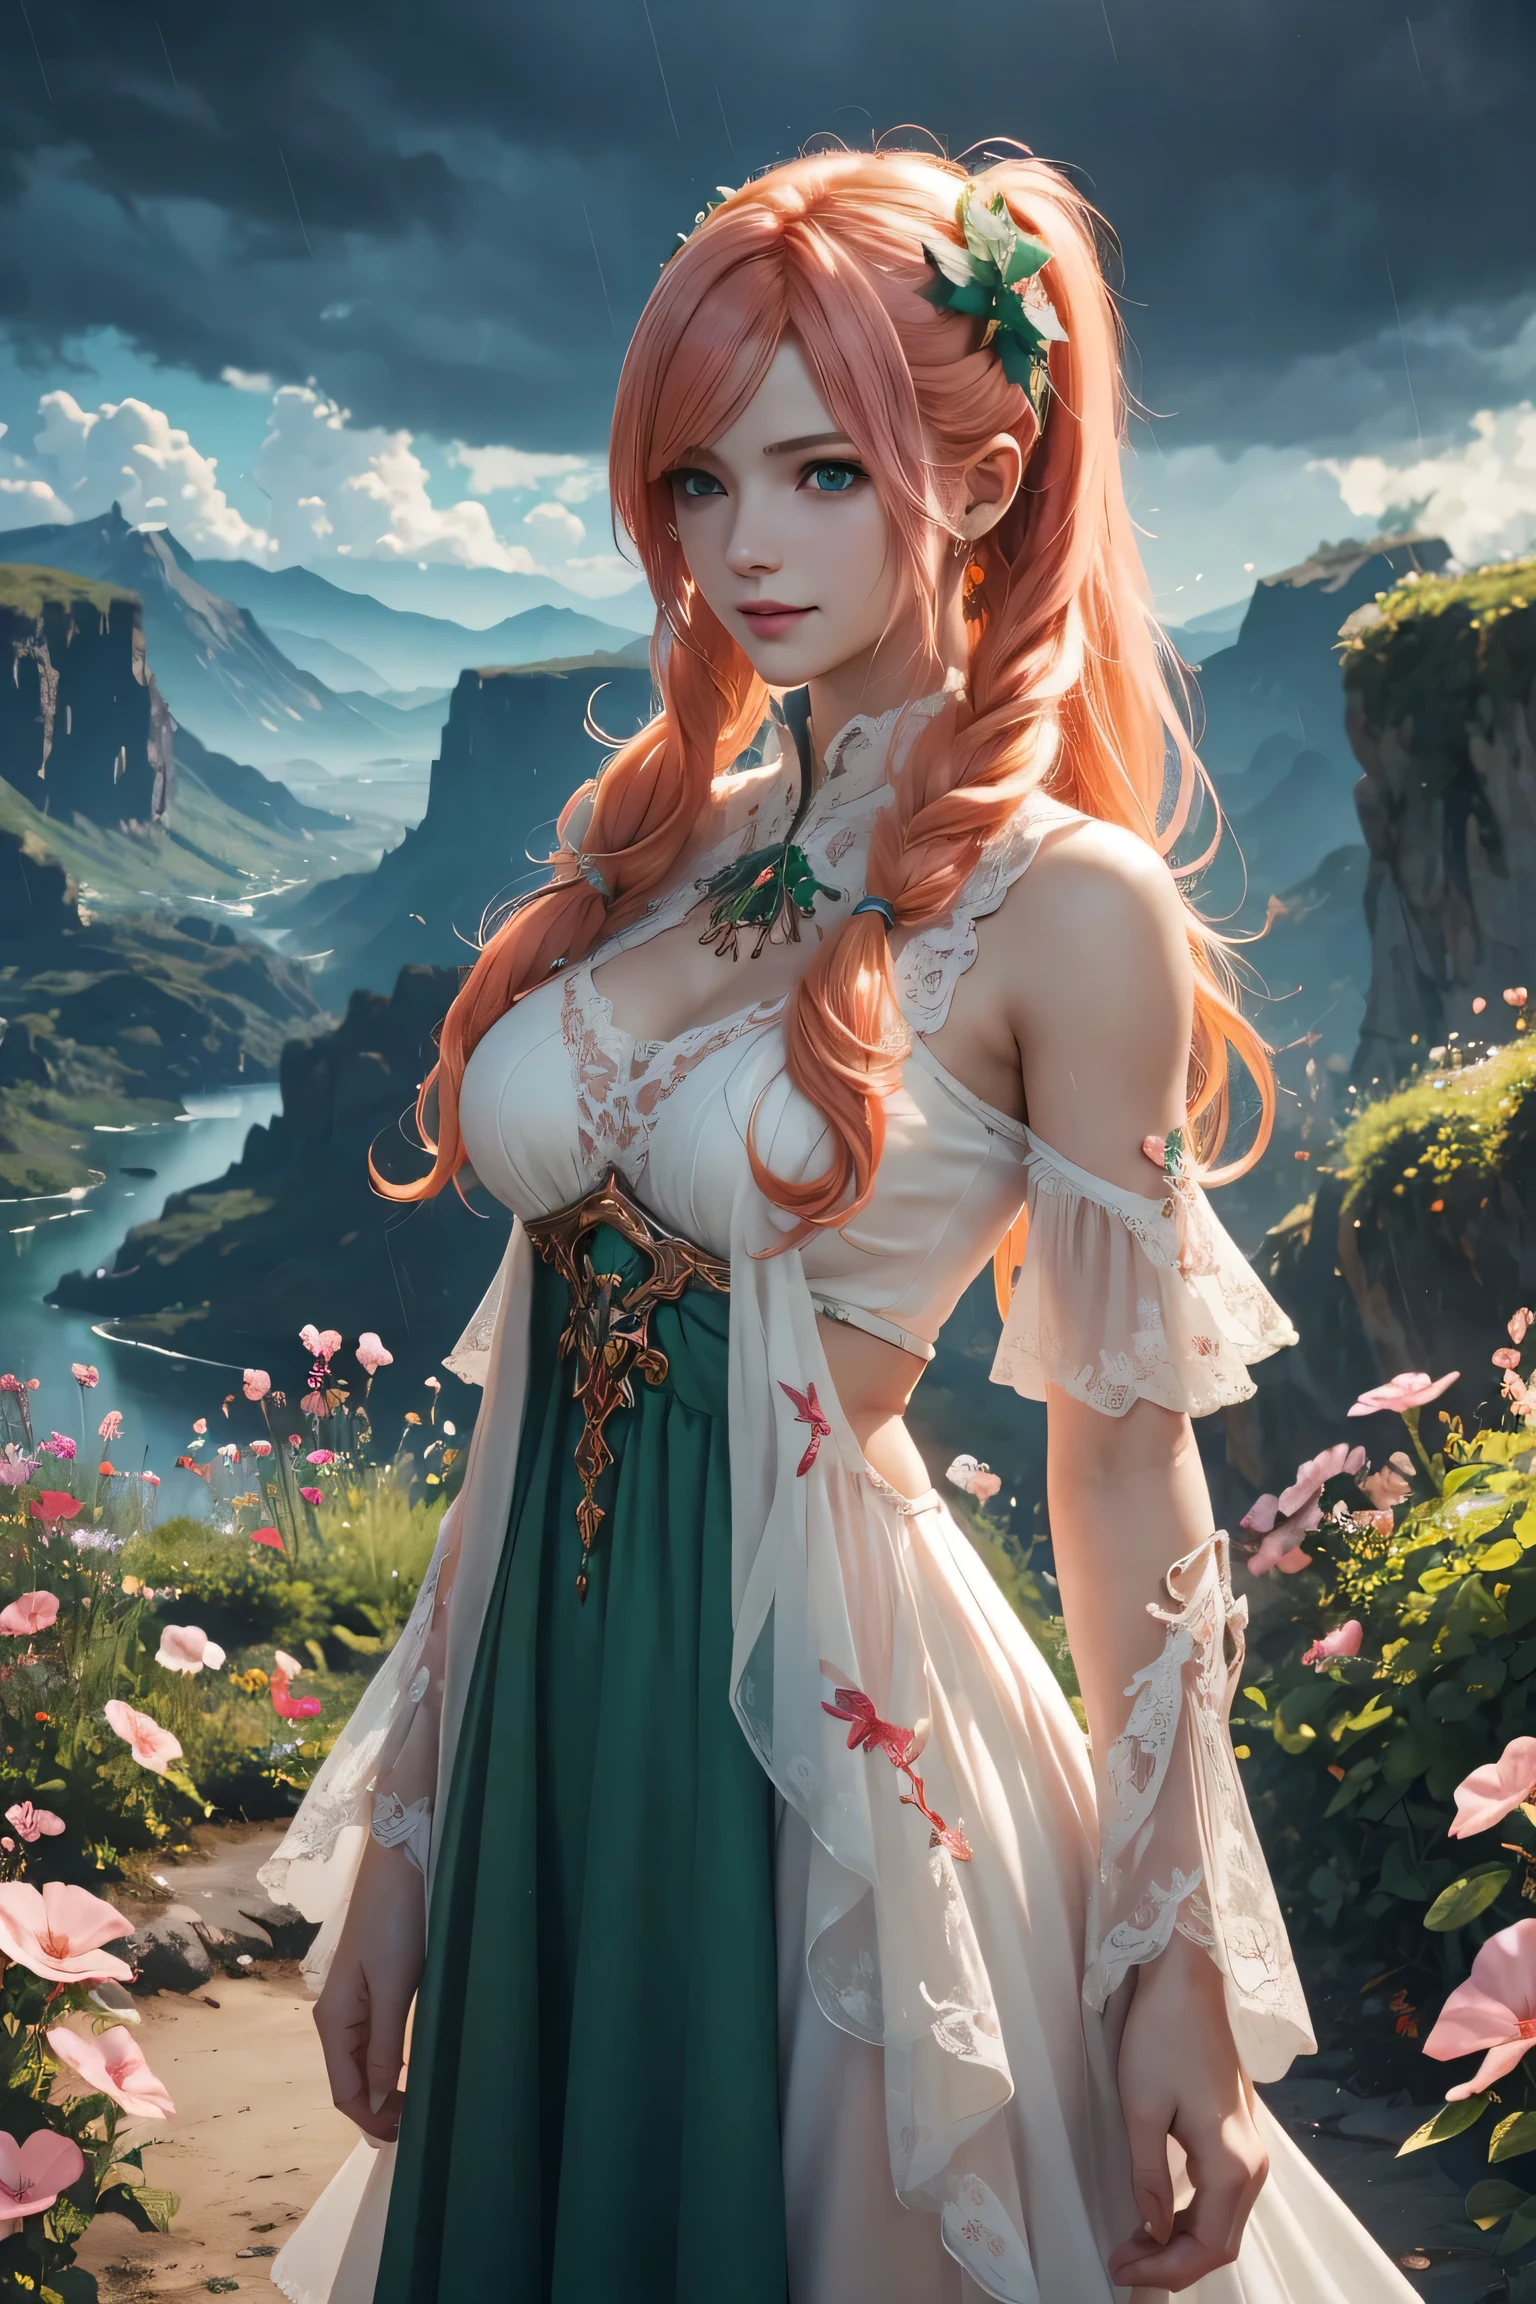 vanilla,Final Fantasy 13,FF13,Orange Hair,Twin tails,Lightly permed hair,Beautiful emerald green eyes,White skin,Red frilled dress,super high quality,super high quality,masterpiece,Digital SLR,Realistic,Further details,Vivid details,Depicted in detail,Detailed face,Further details,Super detailed,Realistic skin texture,Based on anatomical grounds,Perfect Anatomy,Anatomically correct hand,Anatomically correct fingers,Complex 3D rendering,Huge ,Sexy pose,Beautiful morning glory(flower),Rainy Sky,Beautiful scenery,Fantastic rainy sky,Picturesque,Pink Lips,smile,Fantastic butterflies々,